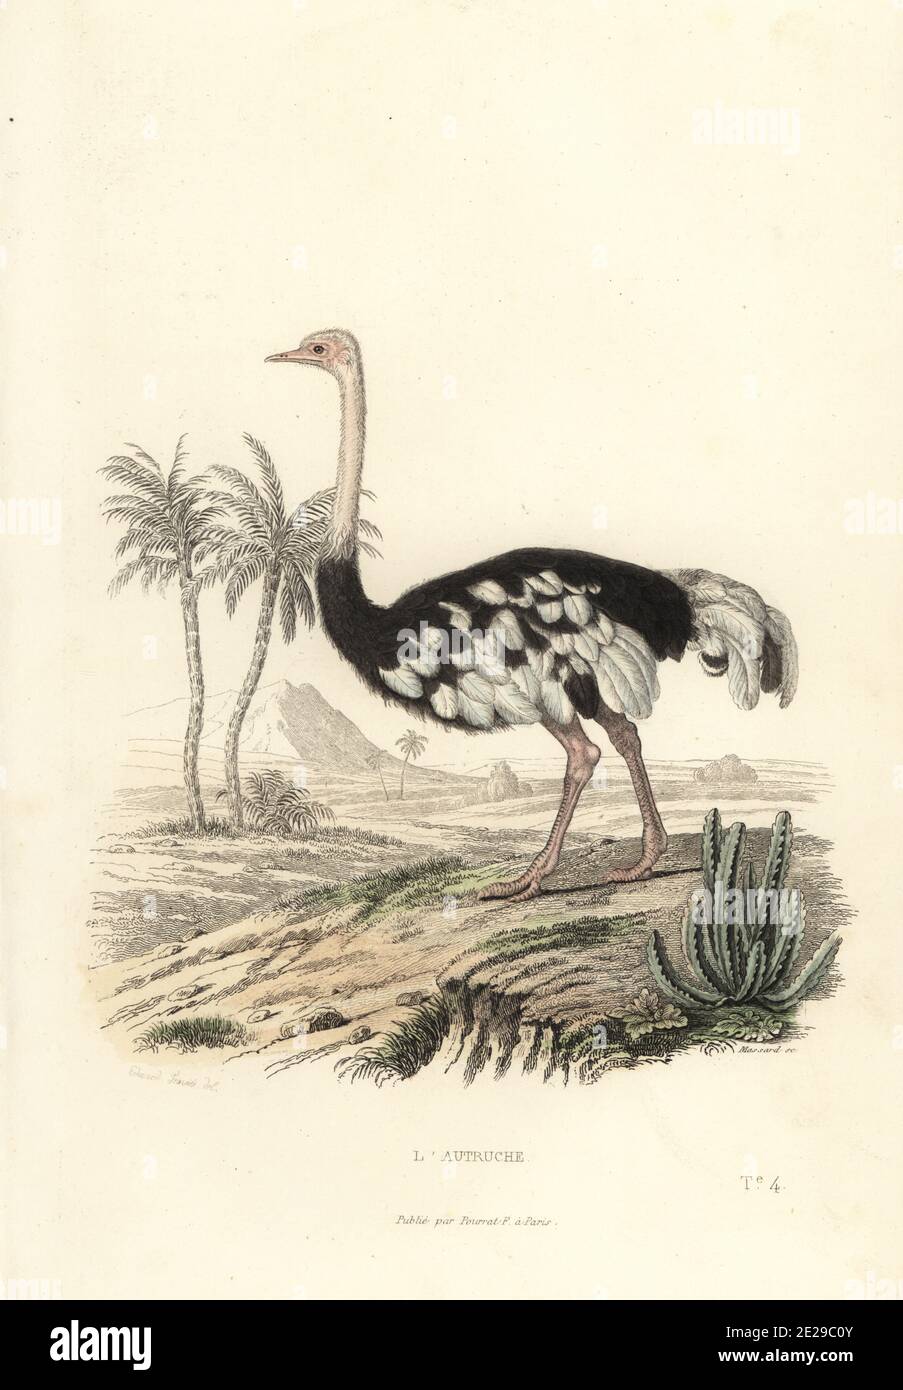 Common ostrich, L'autruche, Struthio camelus. Handcoloured engraving by Leopold Massard after an illustration by Edouard Travies from Achille Richard's Oeuvres Completes de Buffon, Pourrat Freres, Paris, 1839. Stock Photo